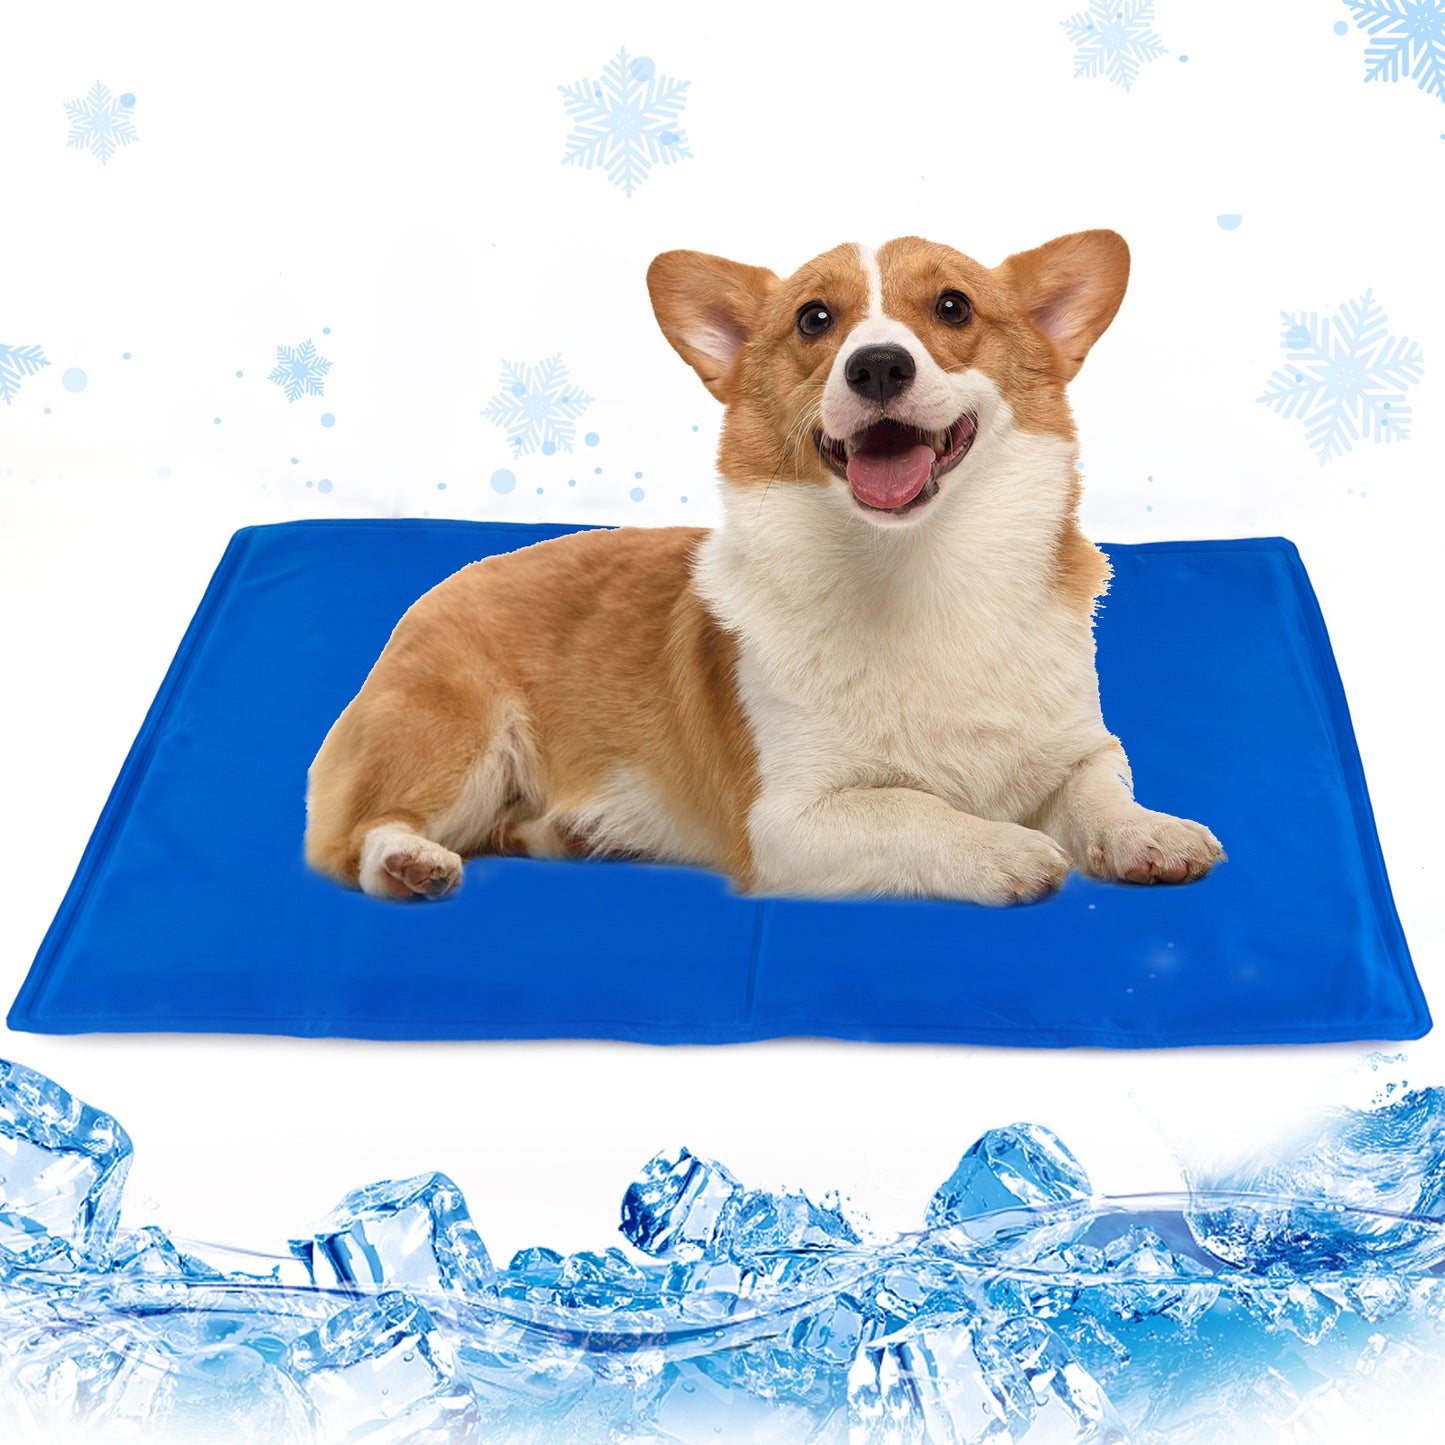 Pet Cooling Mat For Dogs And Cats, Pressure Activated Dog Cooling Pad, No Water Non-Toxic Gel